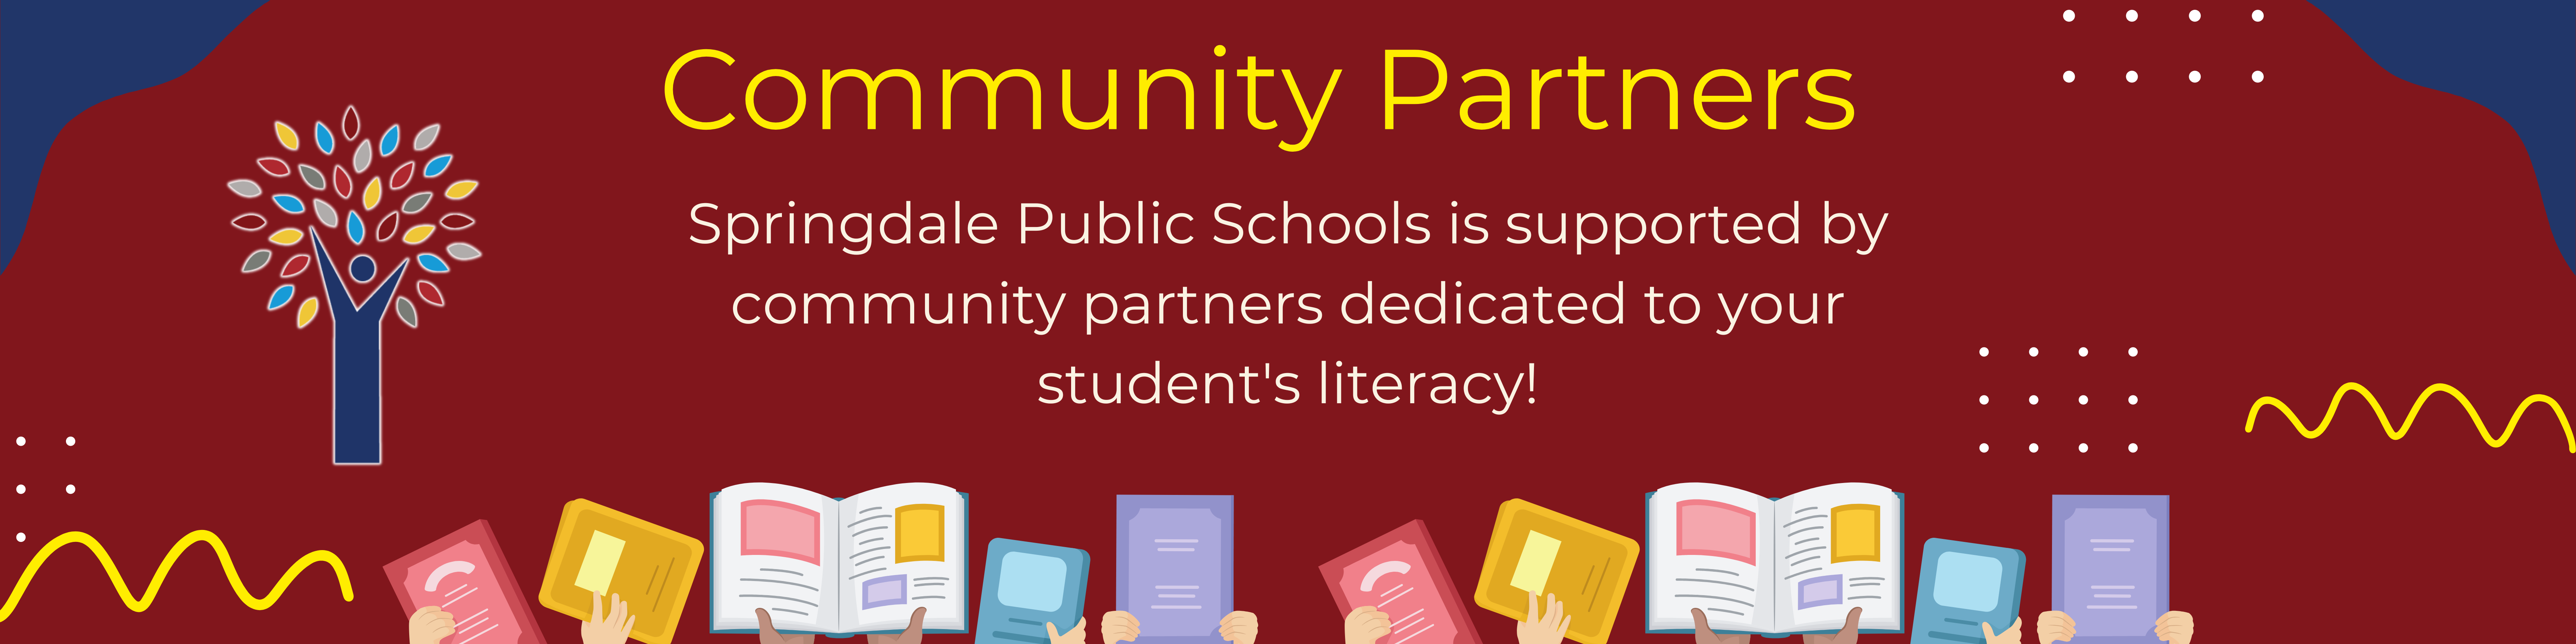 Community Partners. Springdale Public Schools is supported by community partners dedicated to your student's literacy. 